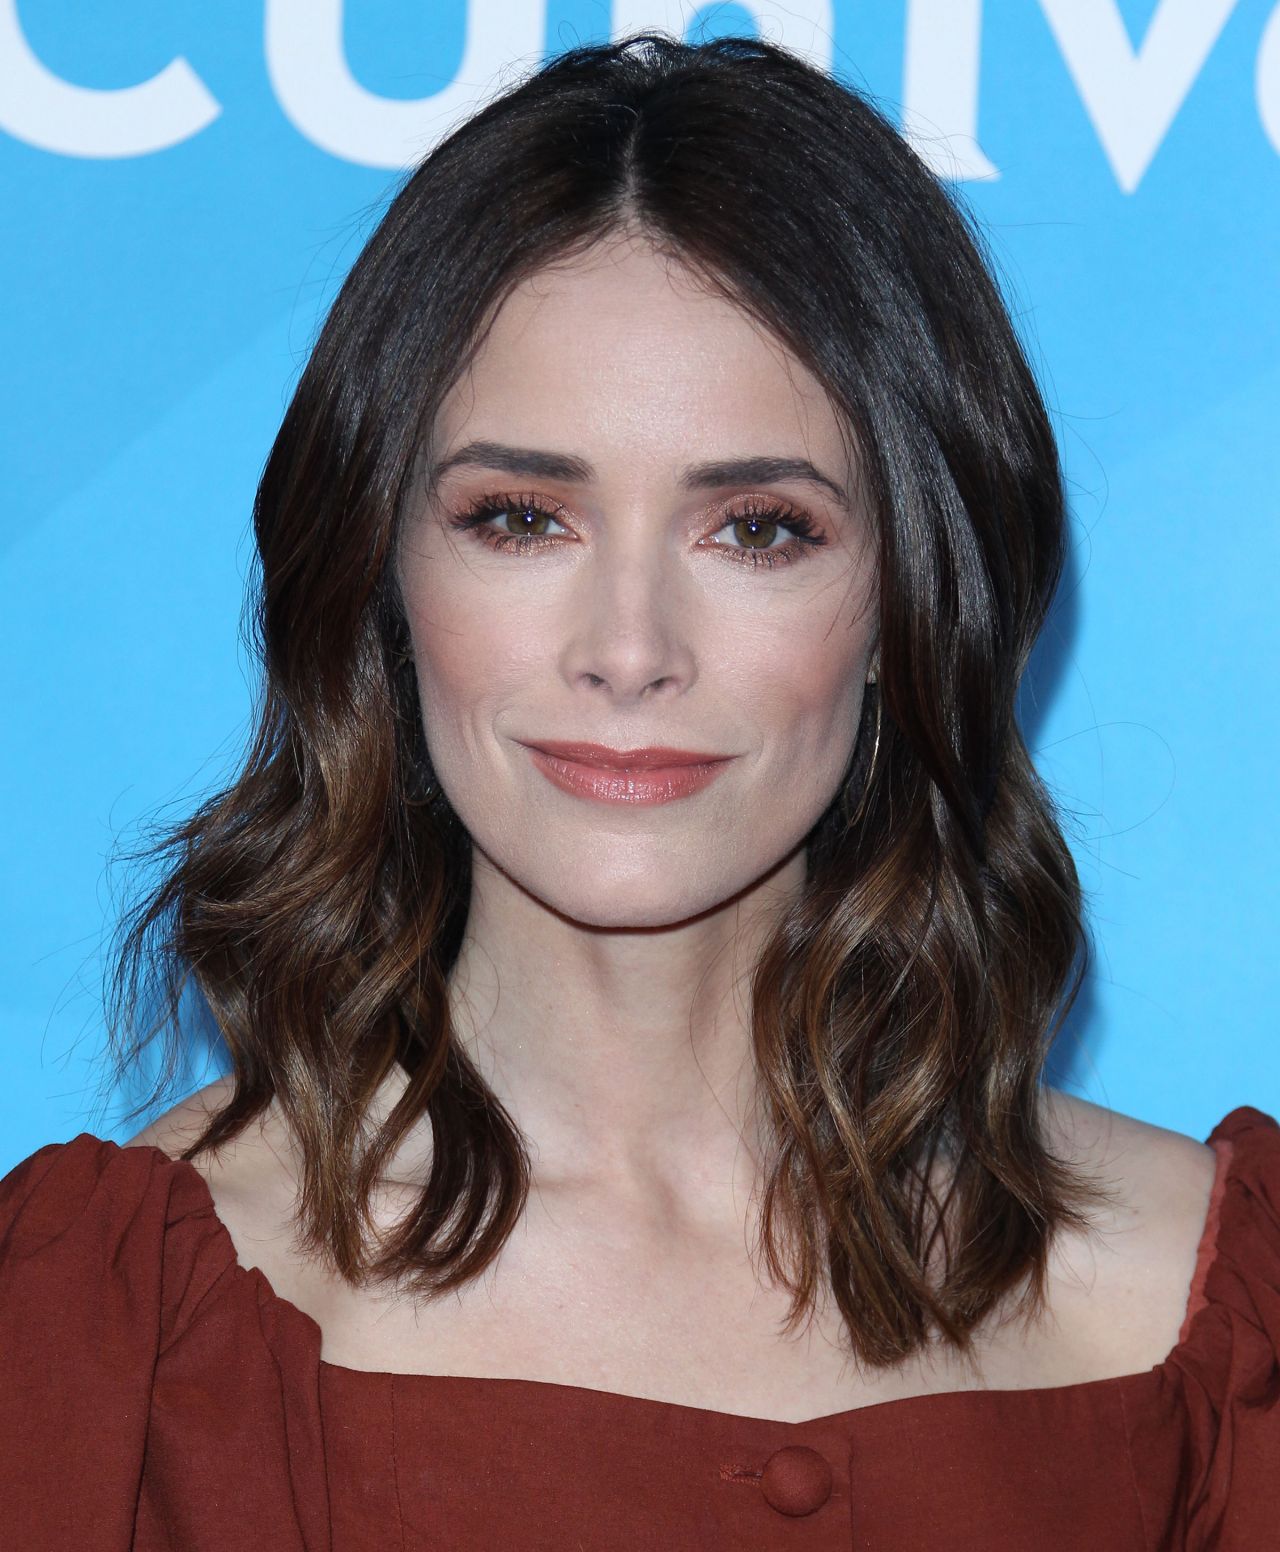 Abigail Spencer NBCUniversal Summer Press Day 2018 in Universal City